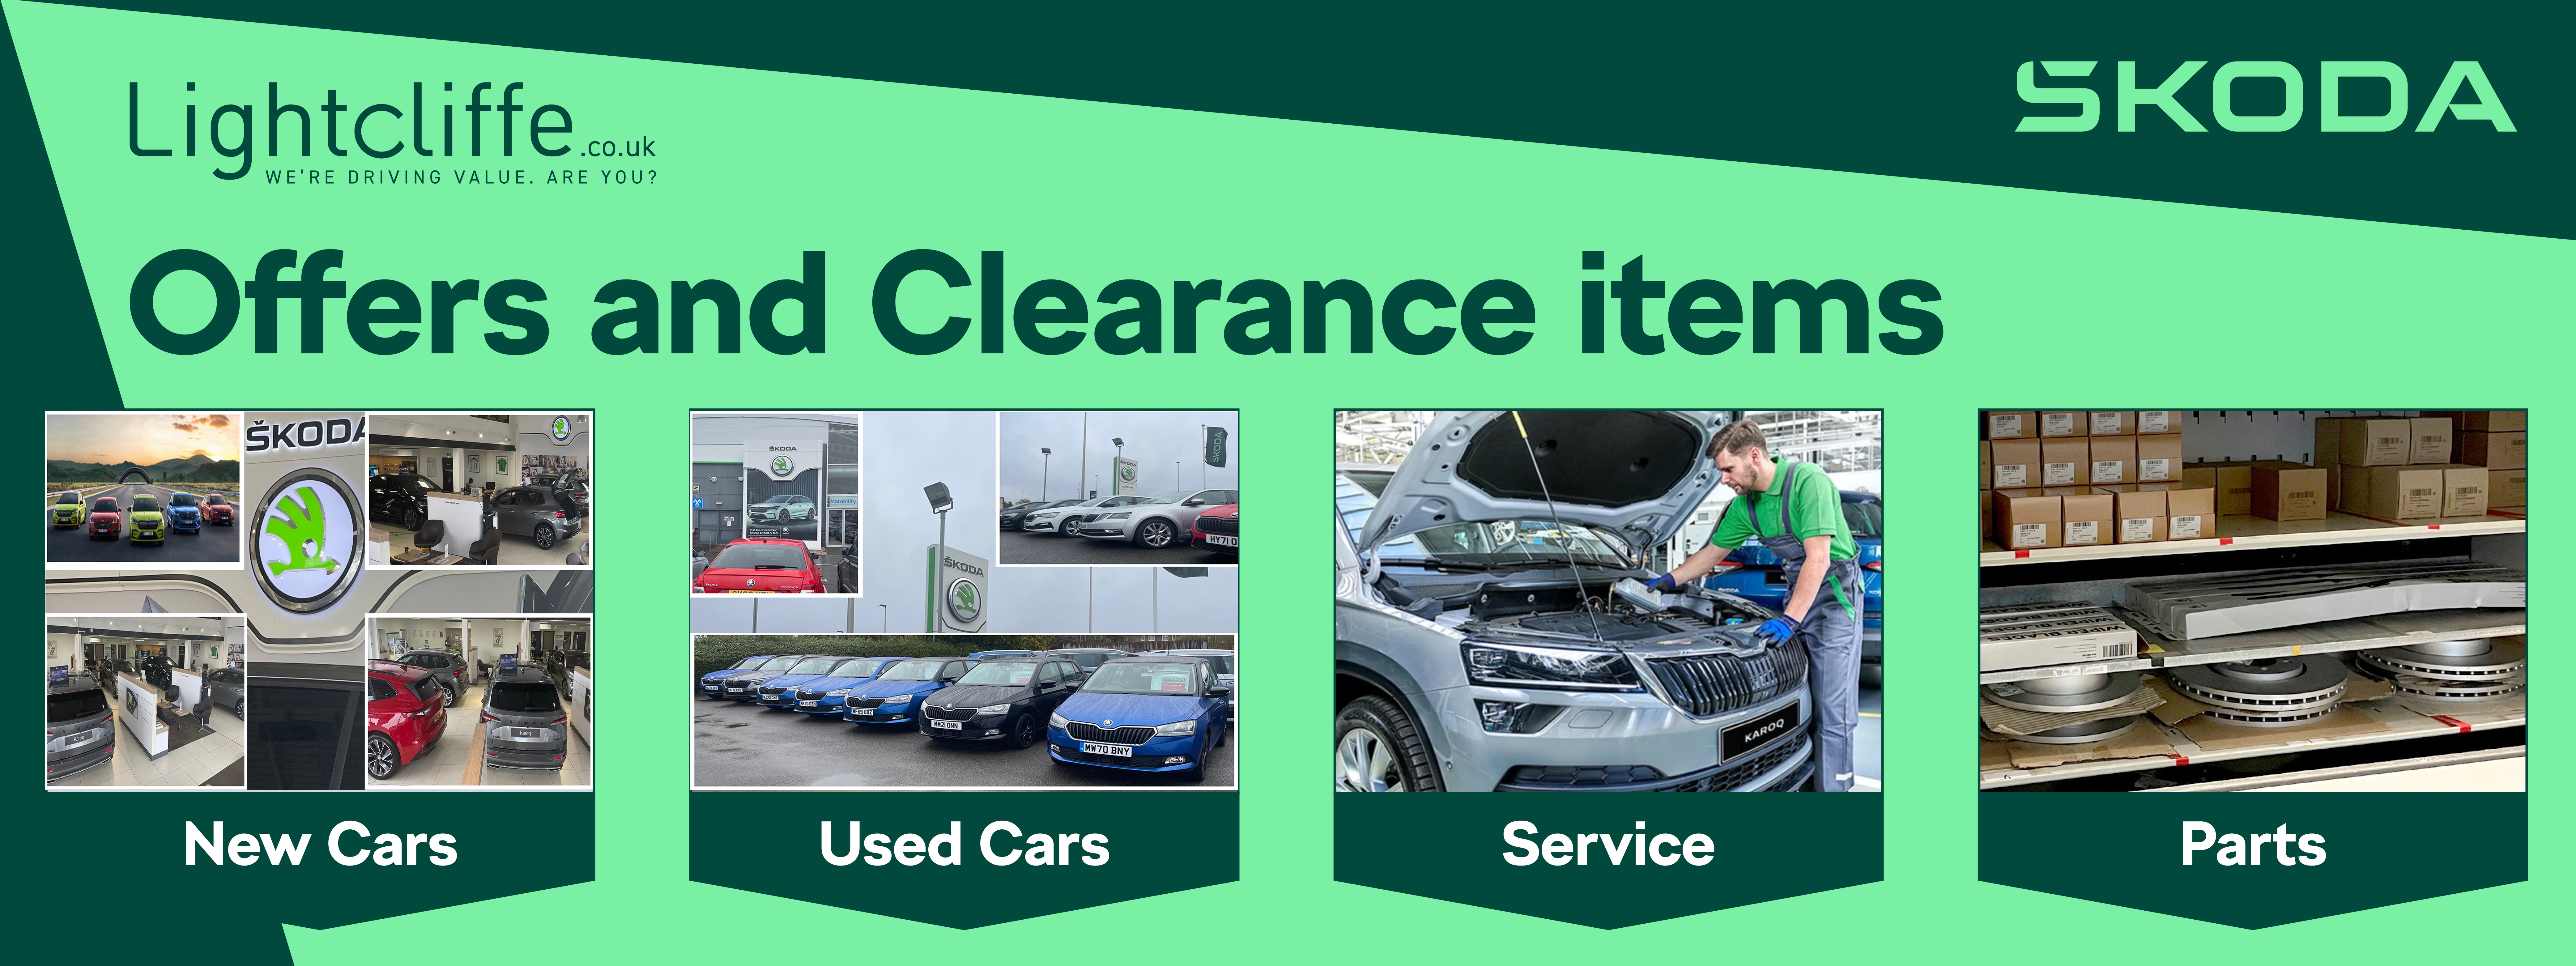 Offers and Clearance Items at Lightcliffe SKODA